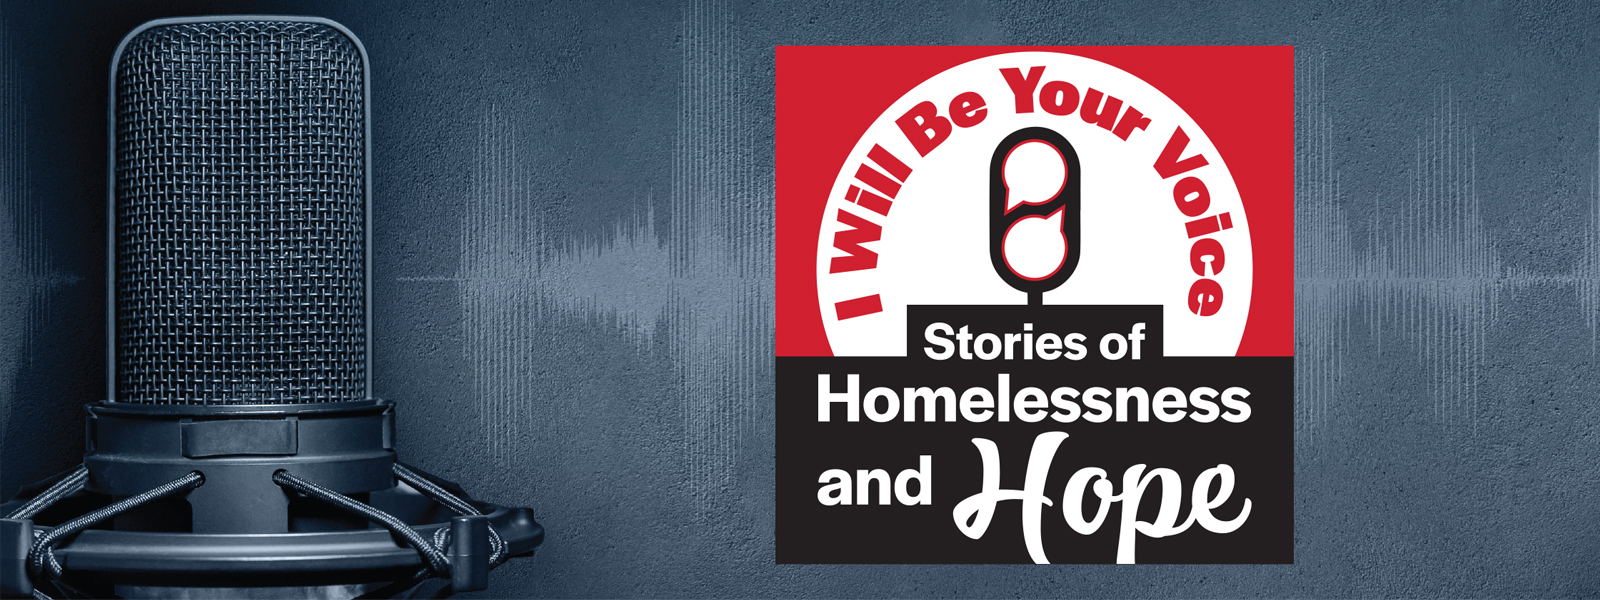 I Will Be Your Voice - Stories of Homelessness and Hope podcast